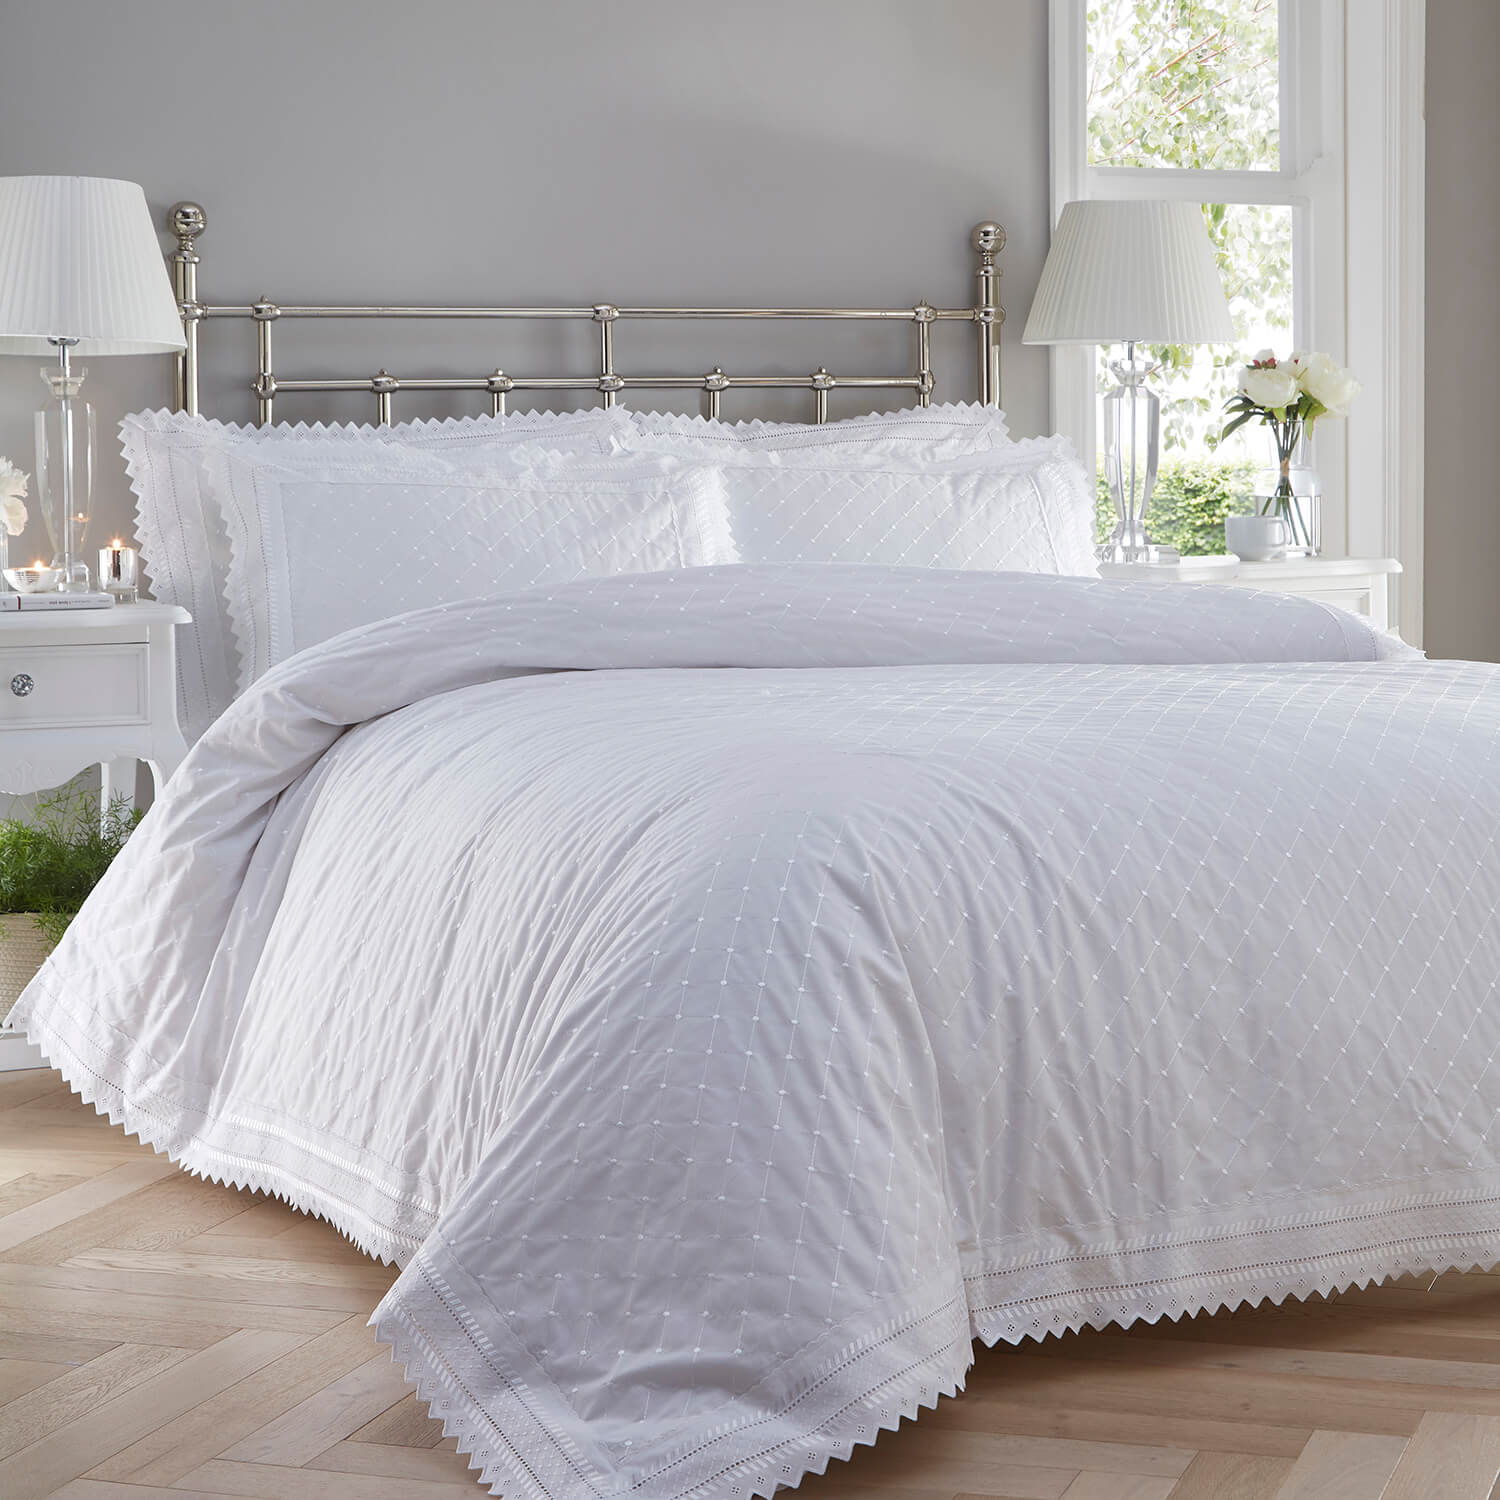  The Home Balmoral Duvet Cover Set - White 1 Shaws Department Stores